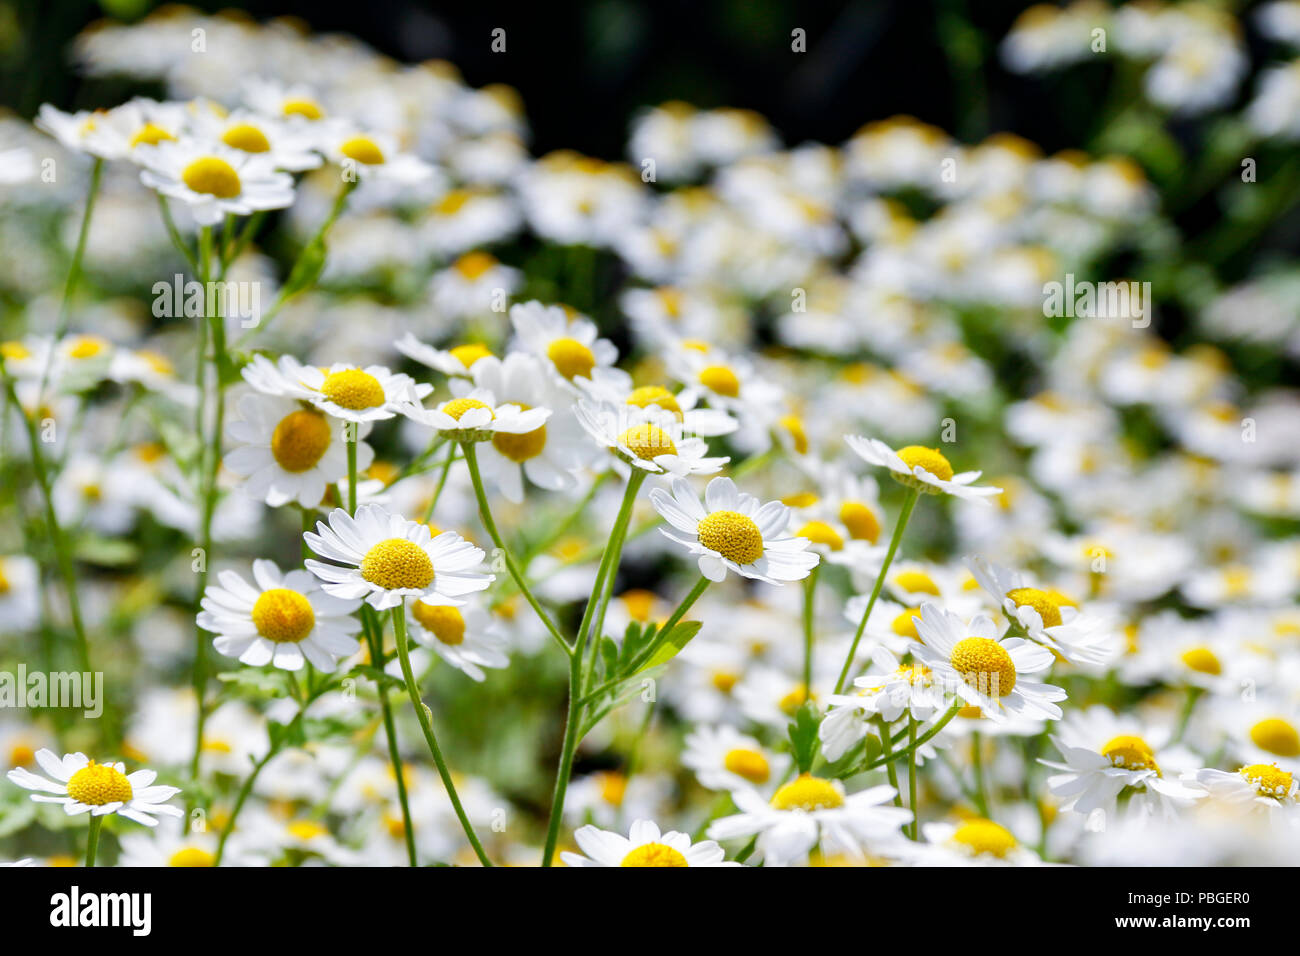 Flowers of Feverfew (Tanacetum Parthenium), a medicinal herb traditionally used for the treatment of migraine headaches Stock Photo